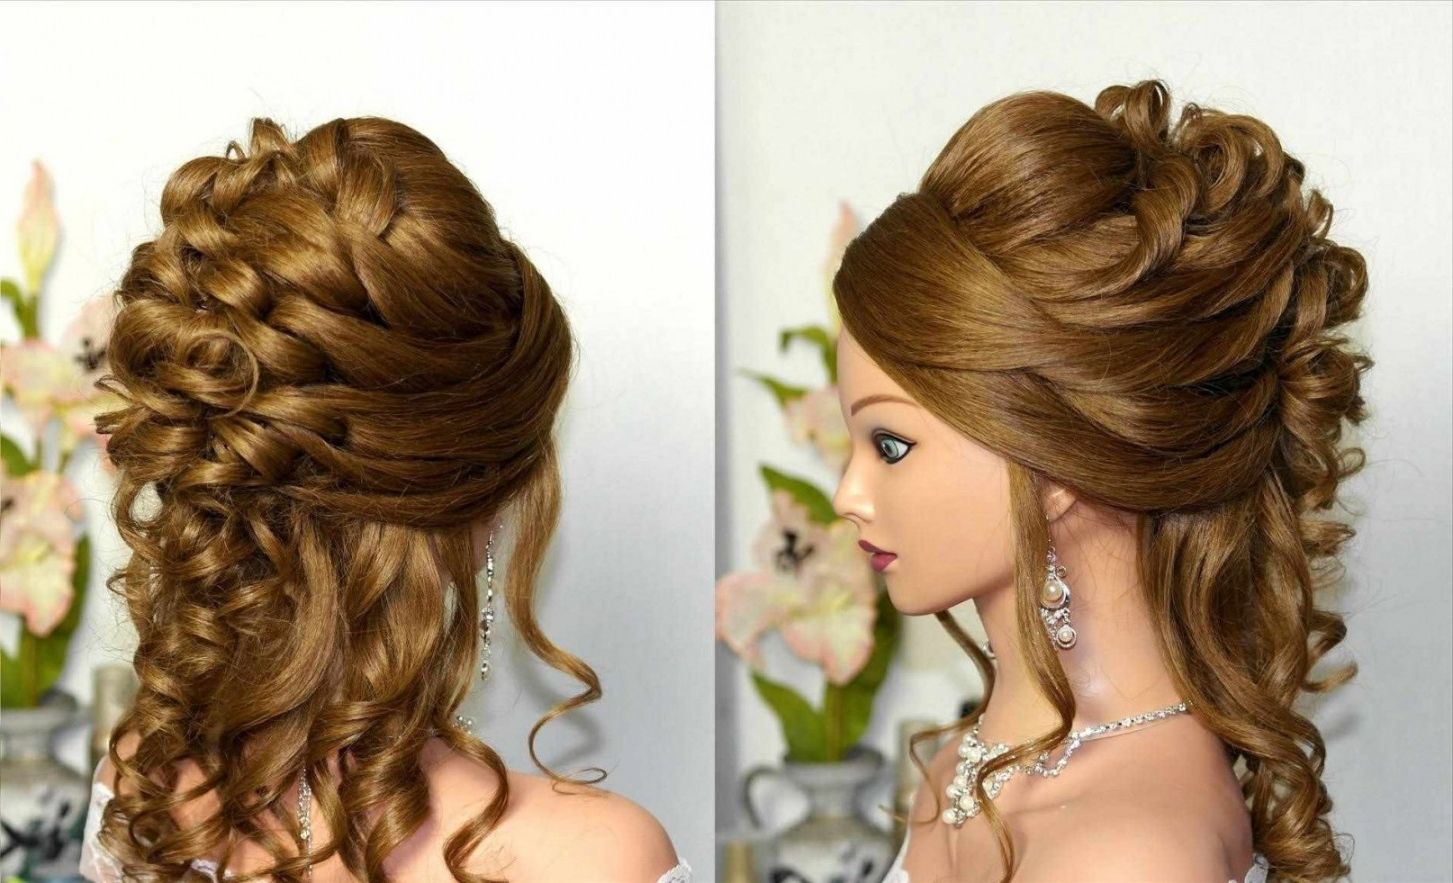 Prom Updo Hairstyles For Long Thick Hair Hairsstyles Impressive Pertaining To Hair Updo Hairstyles For Thick Hair (View 1 of 15)